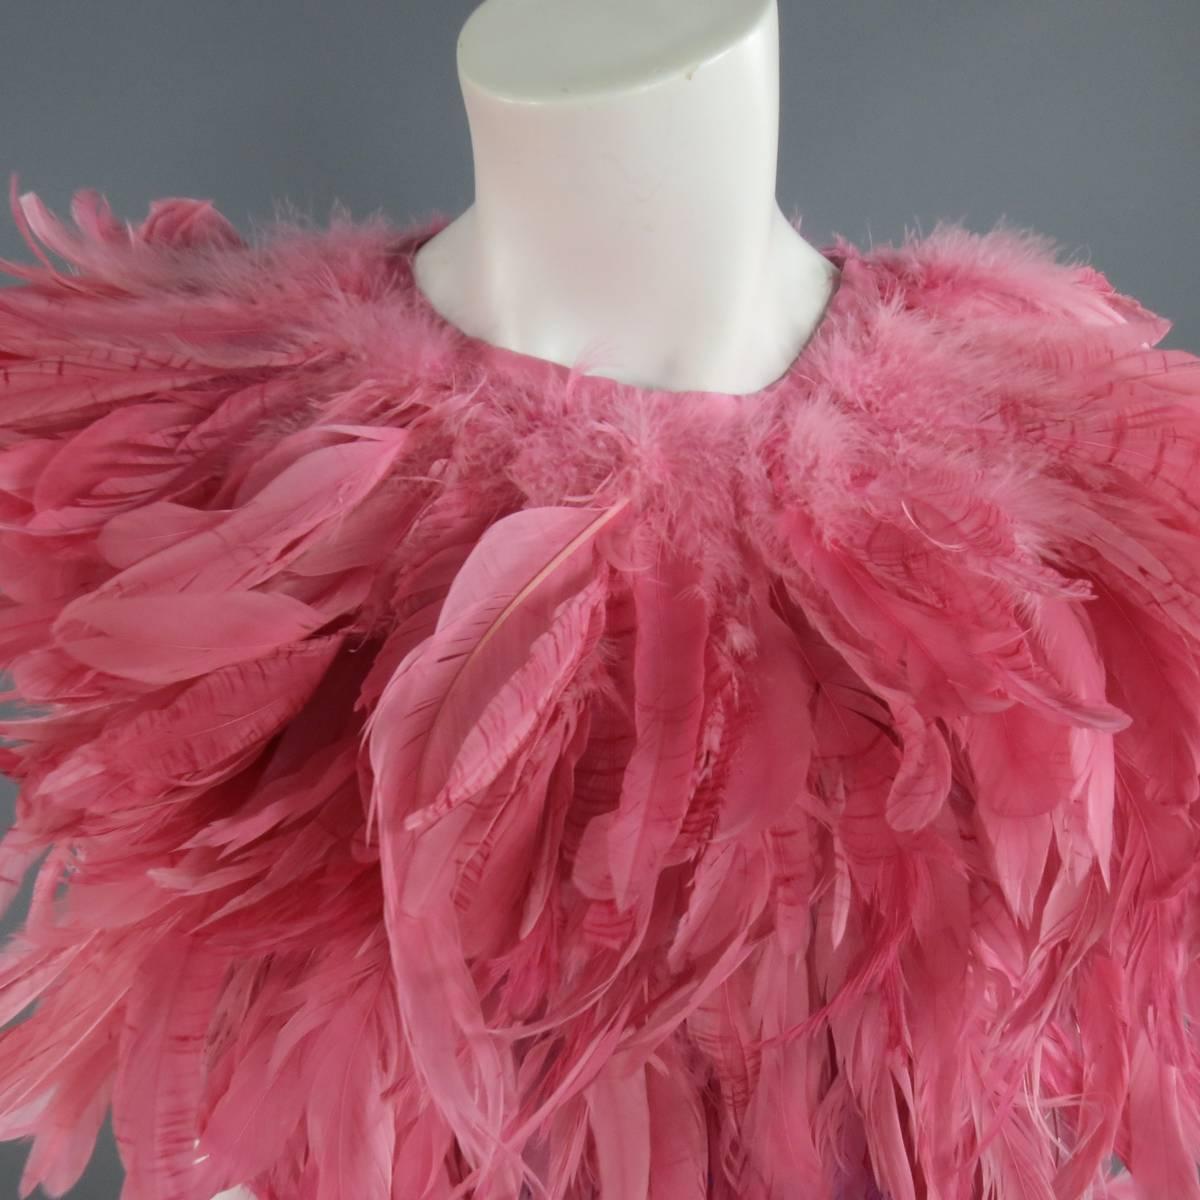 This fabulous MOSCHINO Spring 2016 cocktail dress features a dramatic pink feather neckline, pink and purple rayon body with velvet band, and purple feathered skirt with pink feather layer. Tag Removed but included. Made in Italy.
 
Excellent